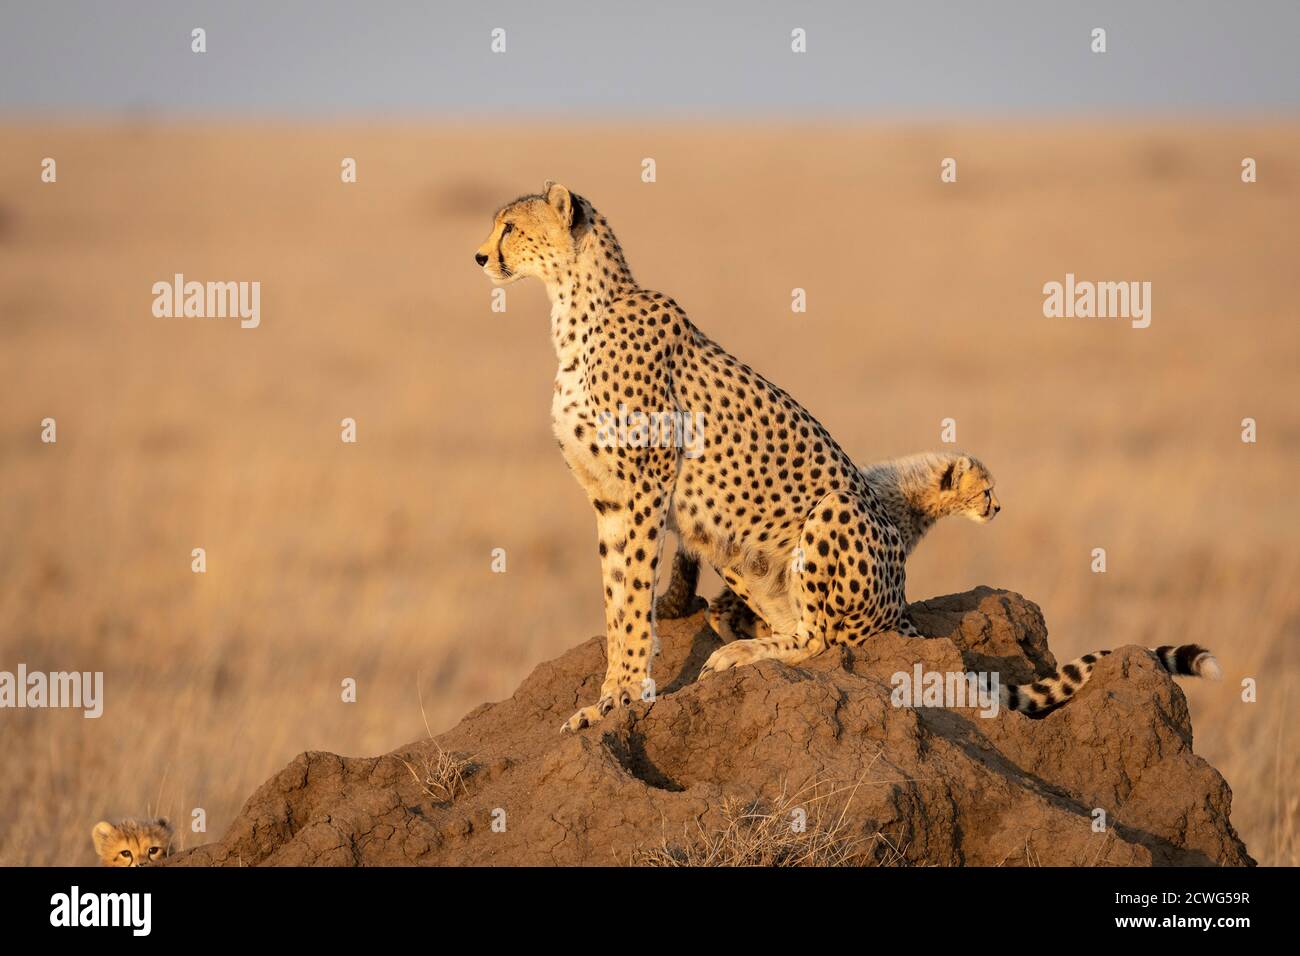 Cheetah mother and baby cheetahs sitting on a termite mound in golden afternoon light looking alert in Serengeti Tanzania Stock Photo